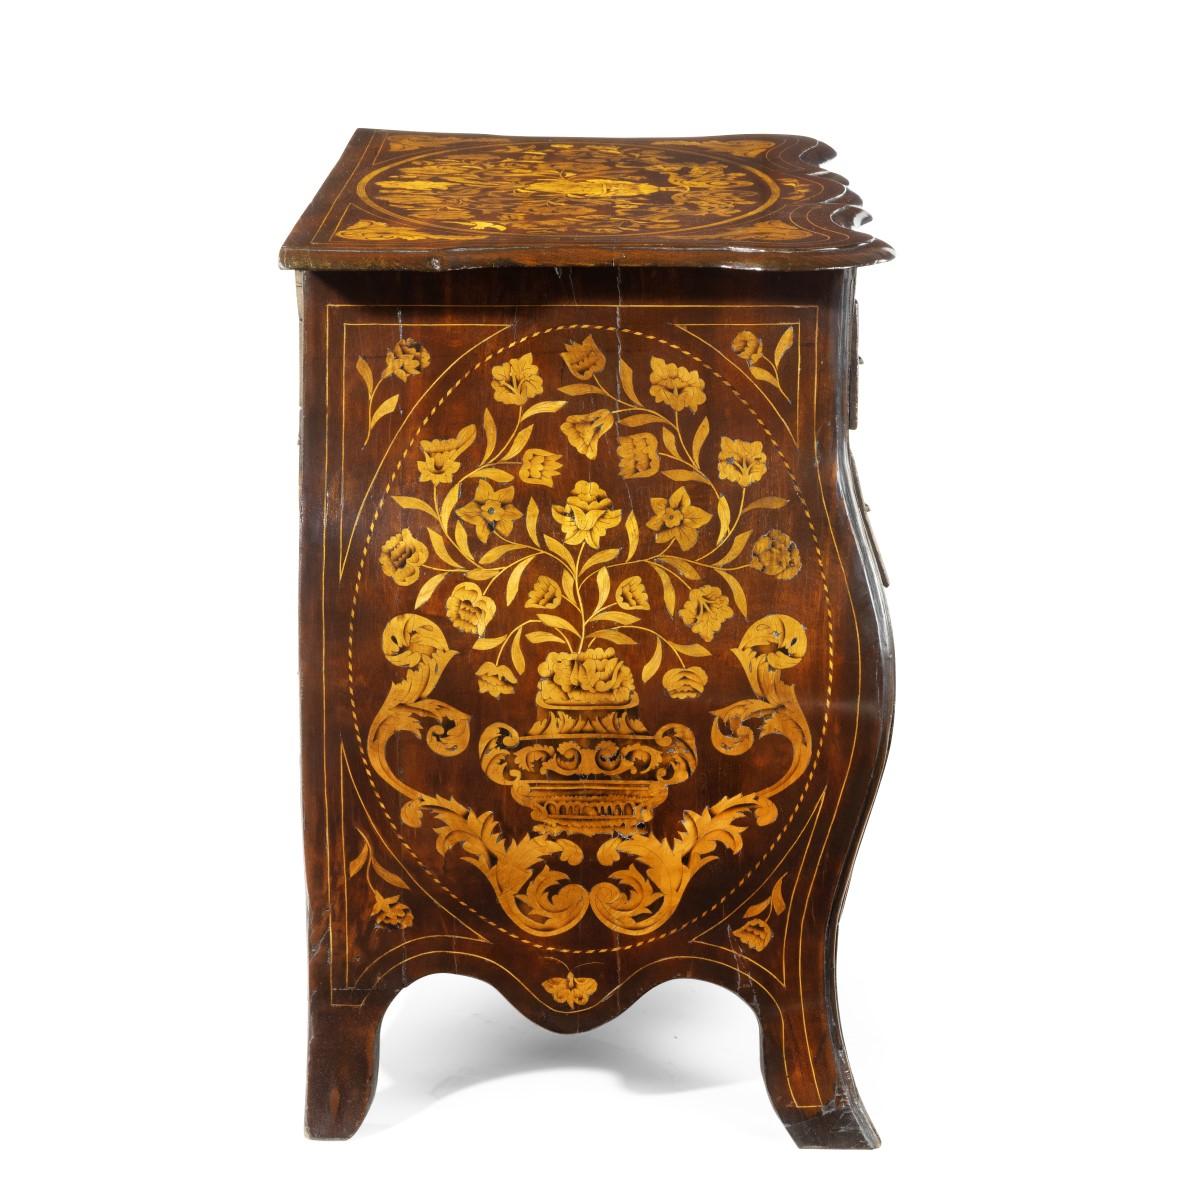 Period Dutch Mahogany Four-Drawer Bombe Marquetry Commode, 1800 In Good Condition For Sale In Lymington, Hampshire